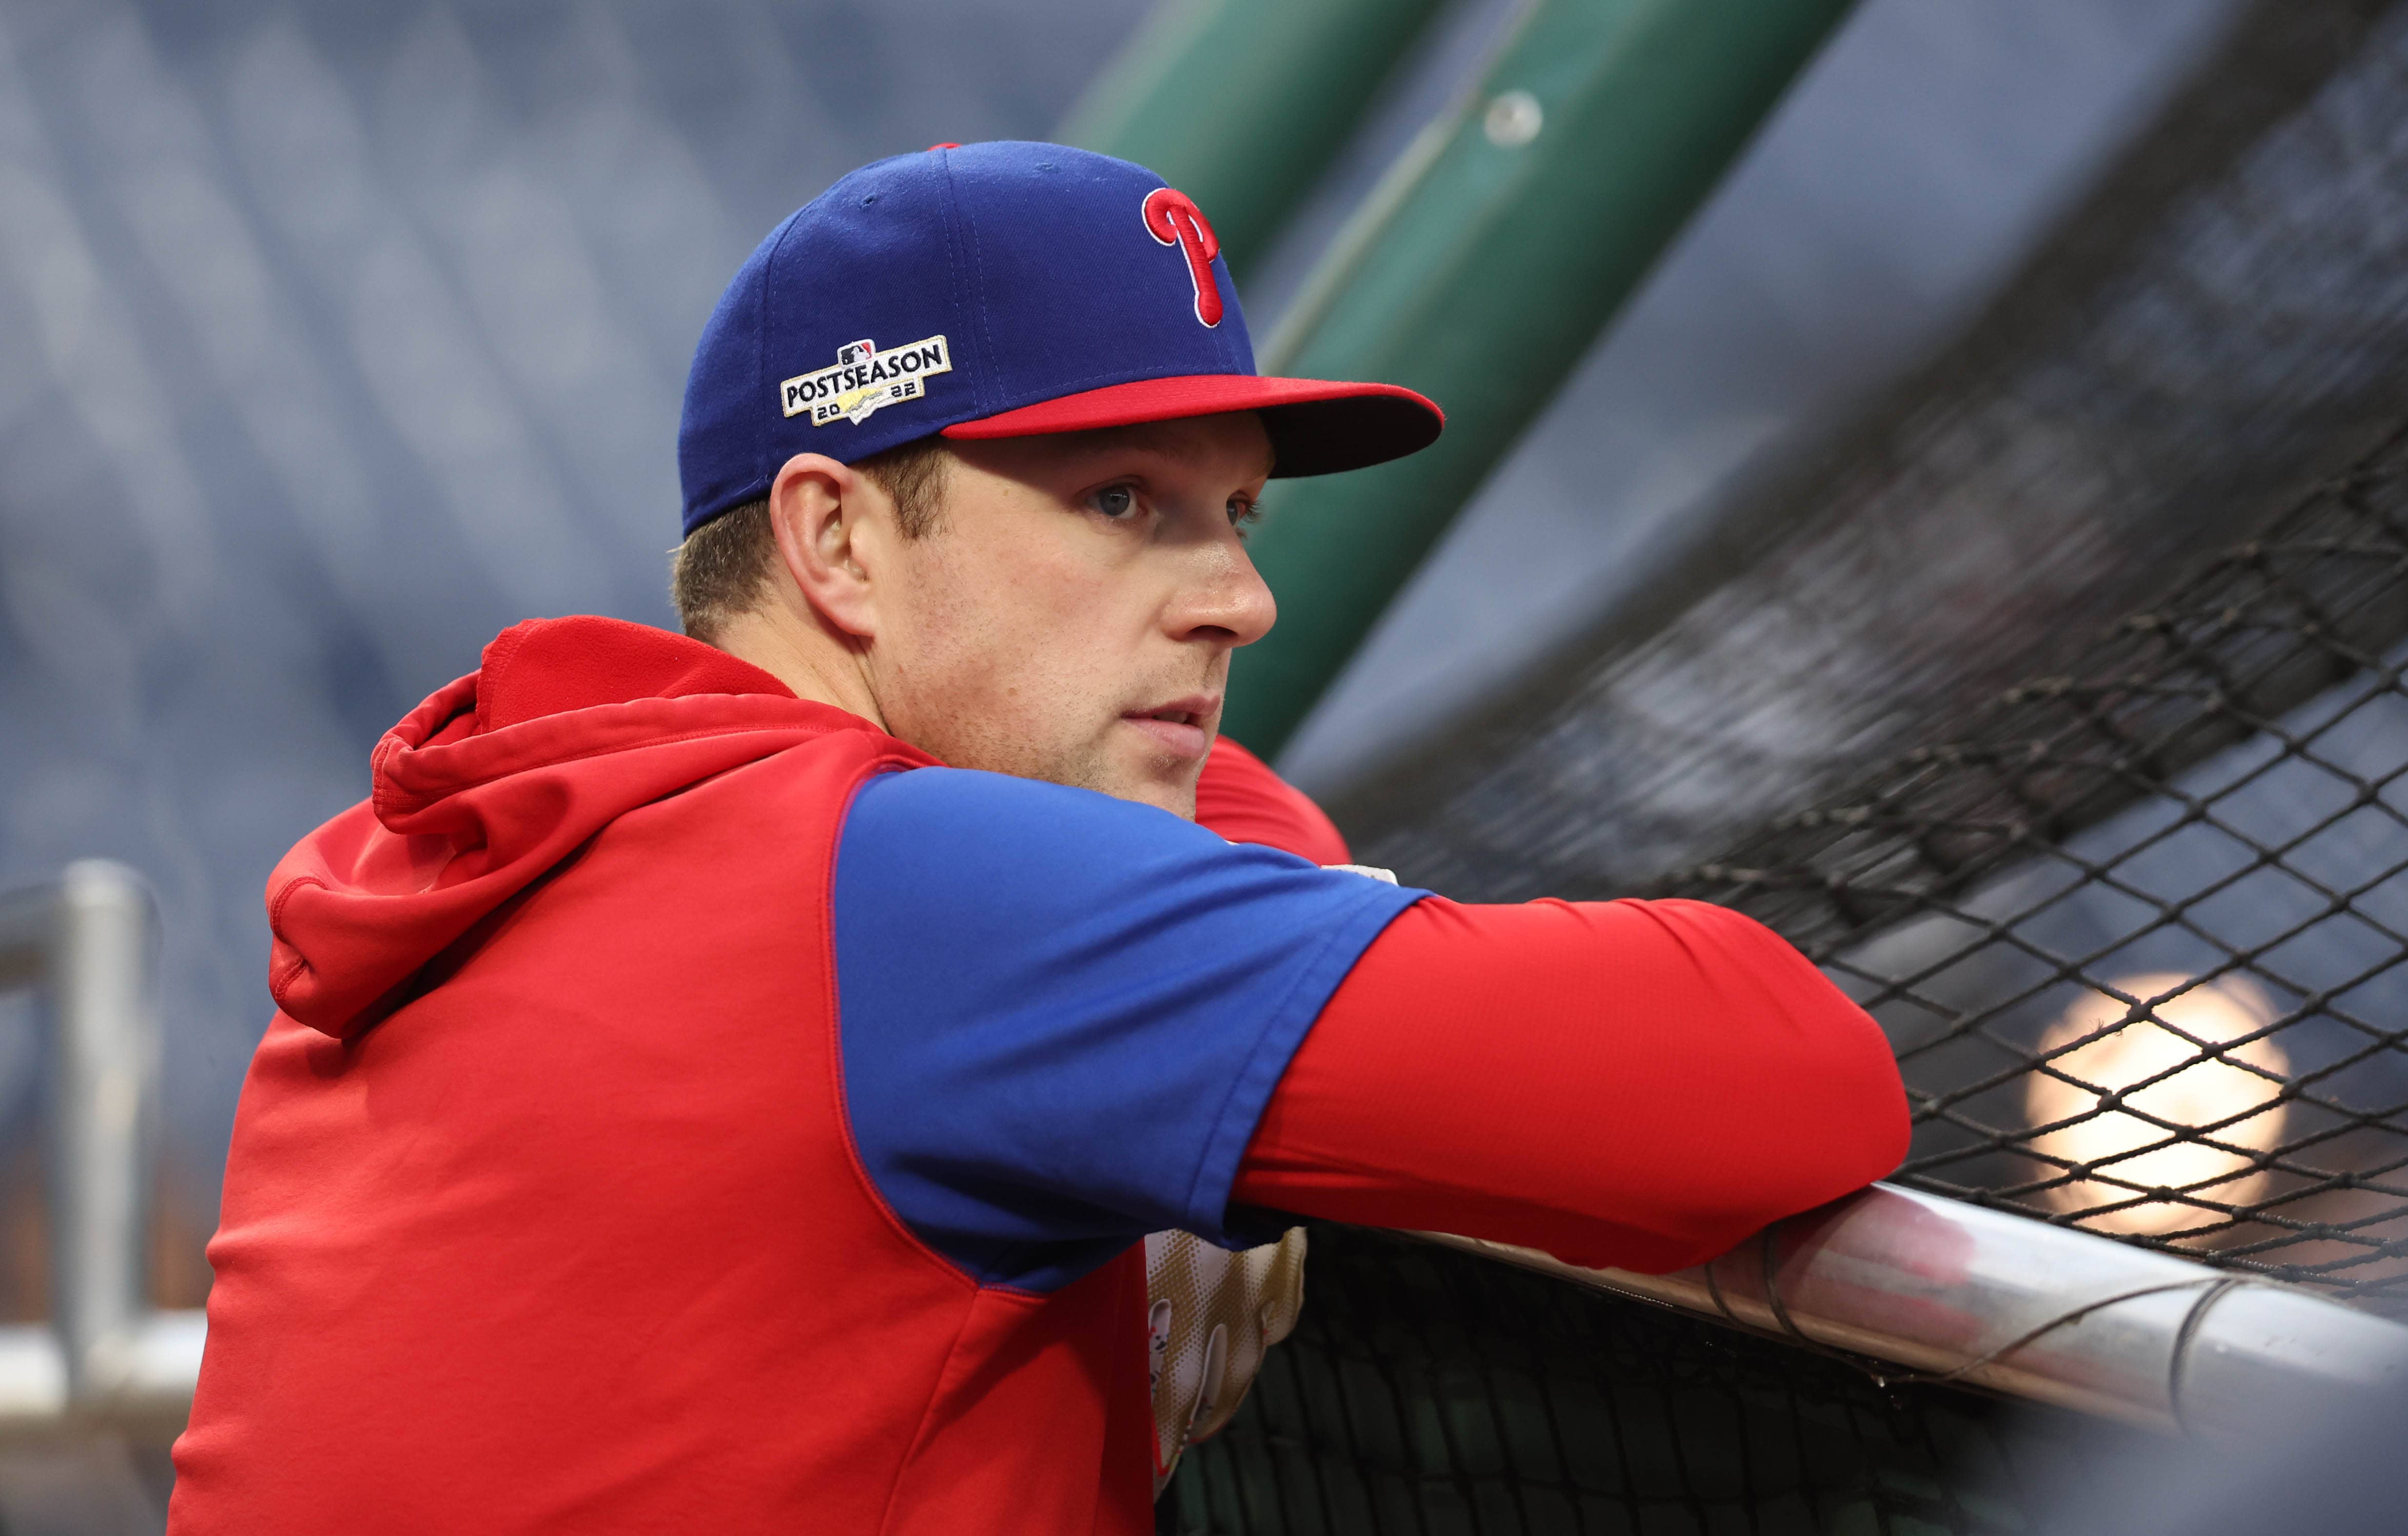 Rhys Hoskins knee injury: Torn ACL, will have surgery